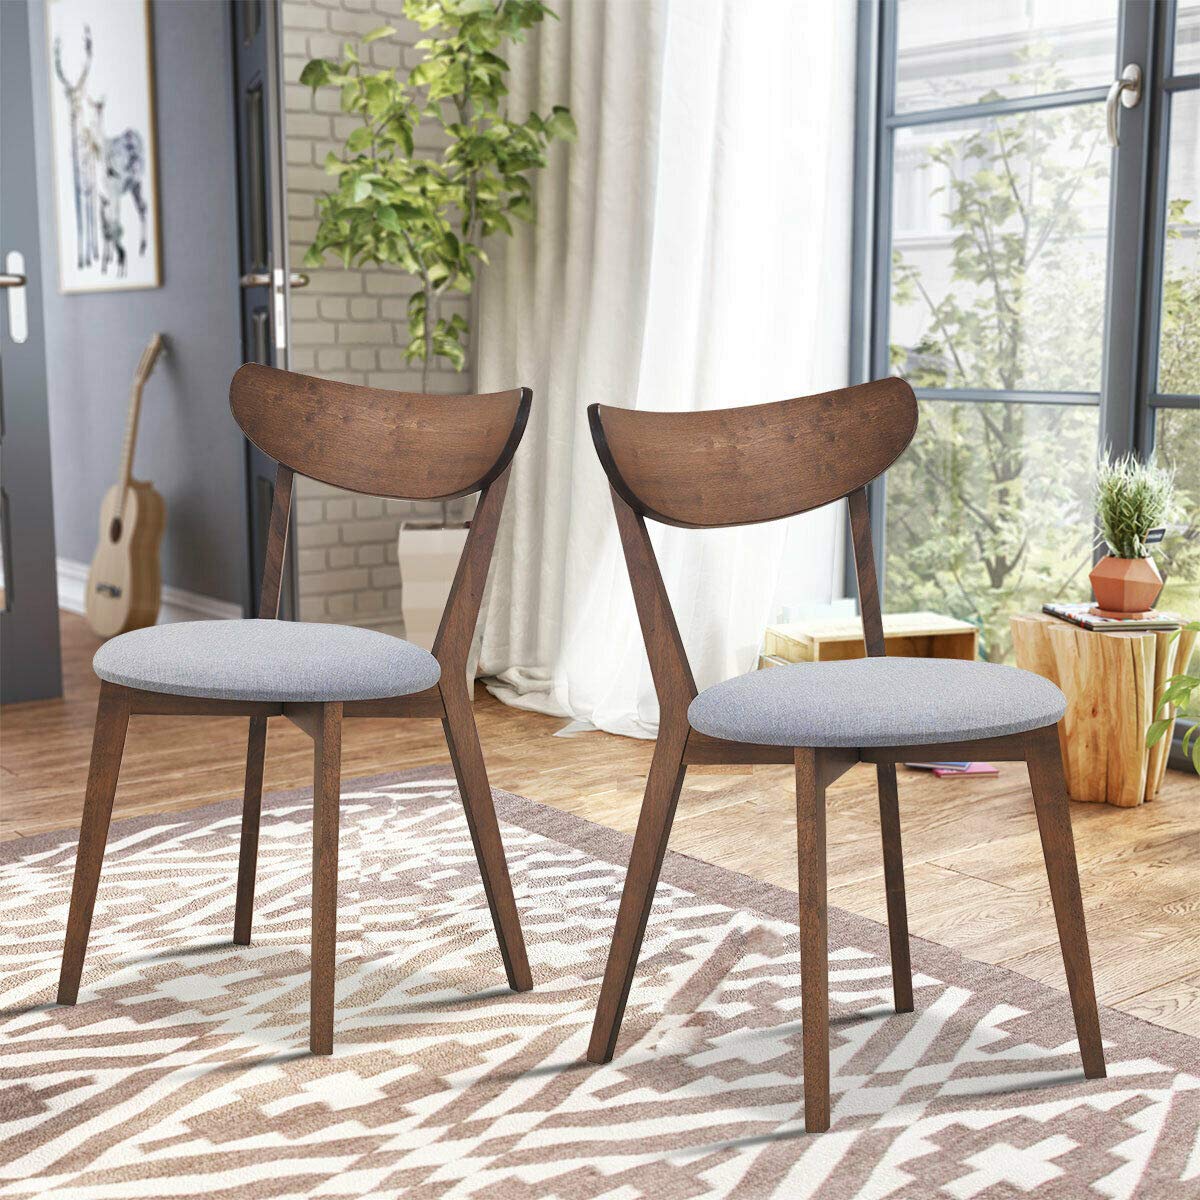 Giantex Set of 2 Dining Chairs